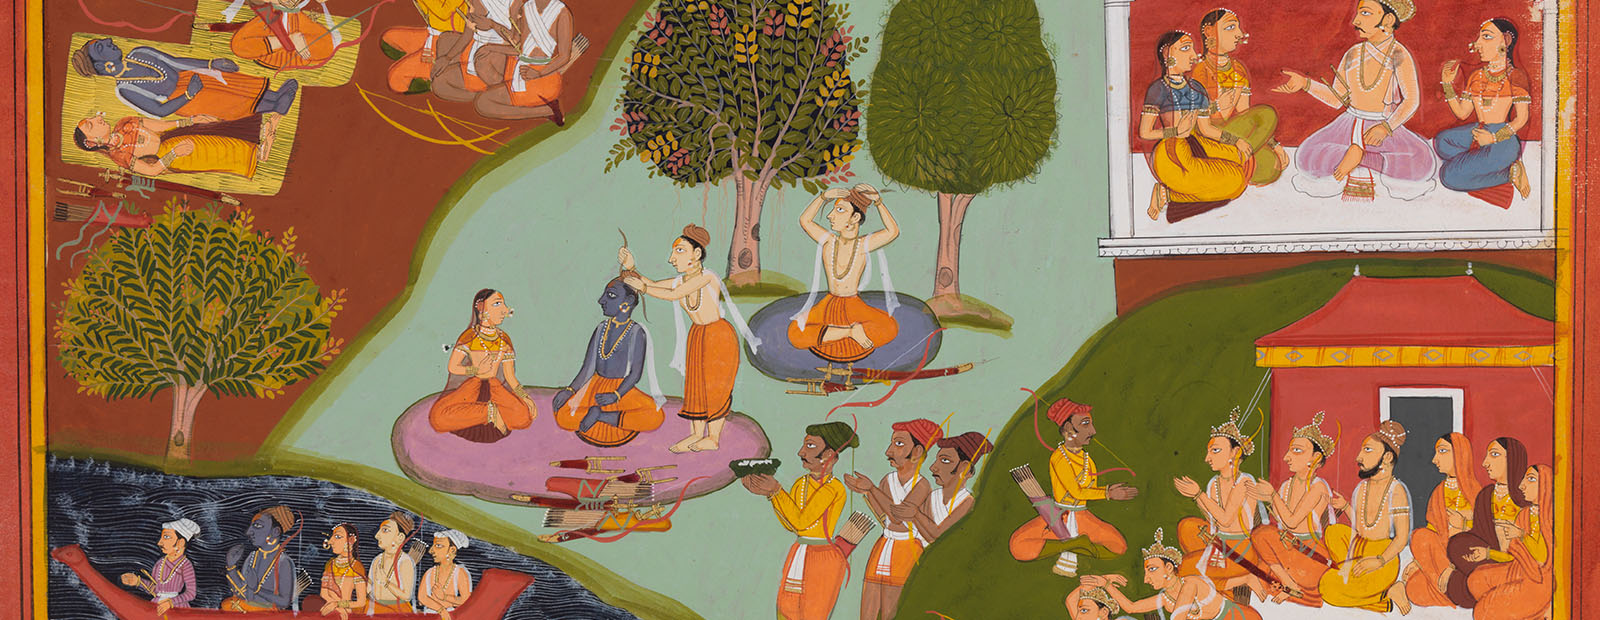 Rama leaves for exile